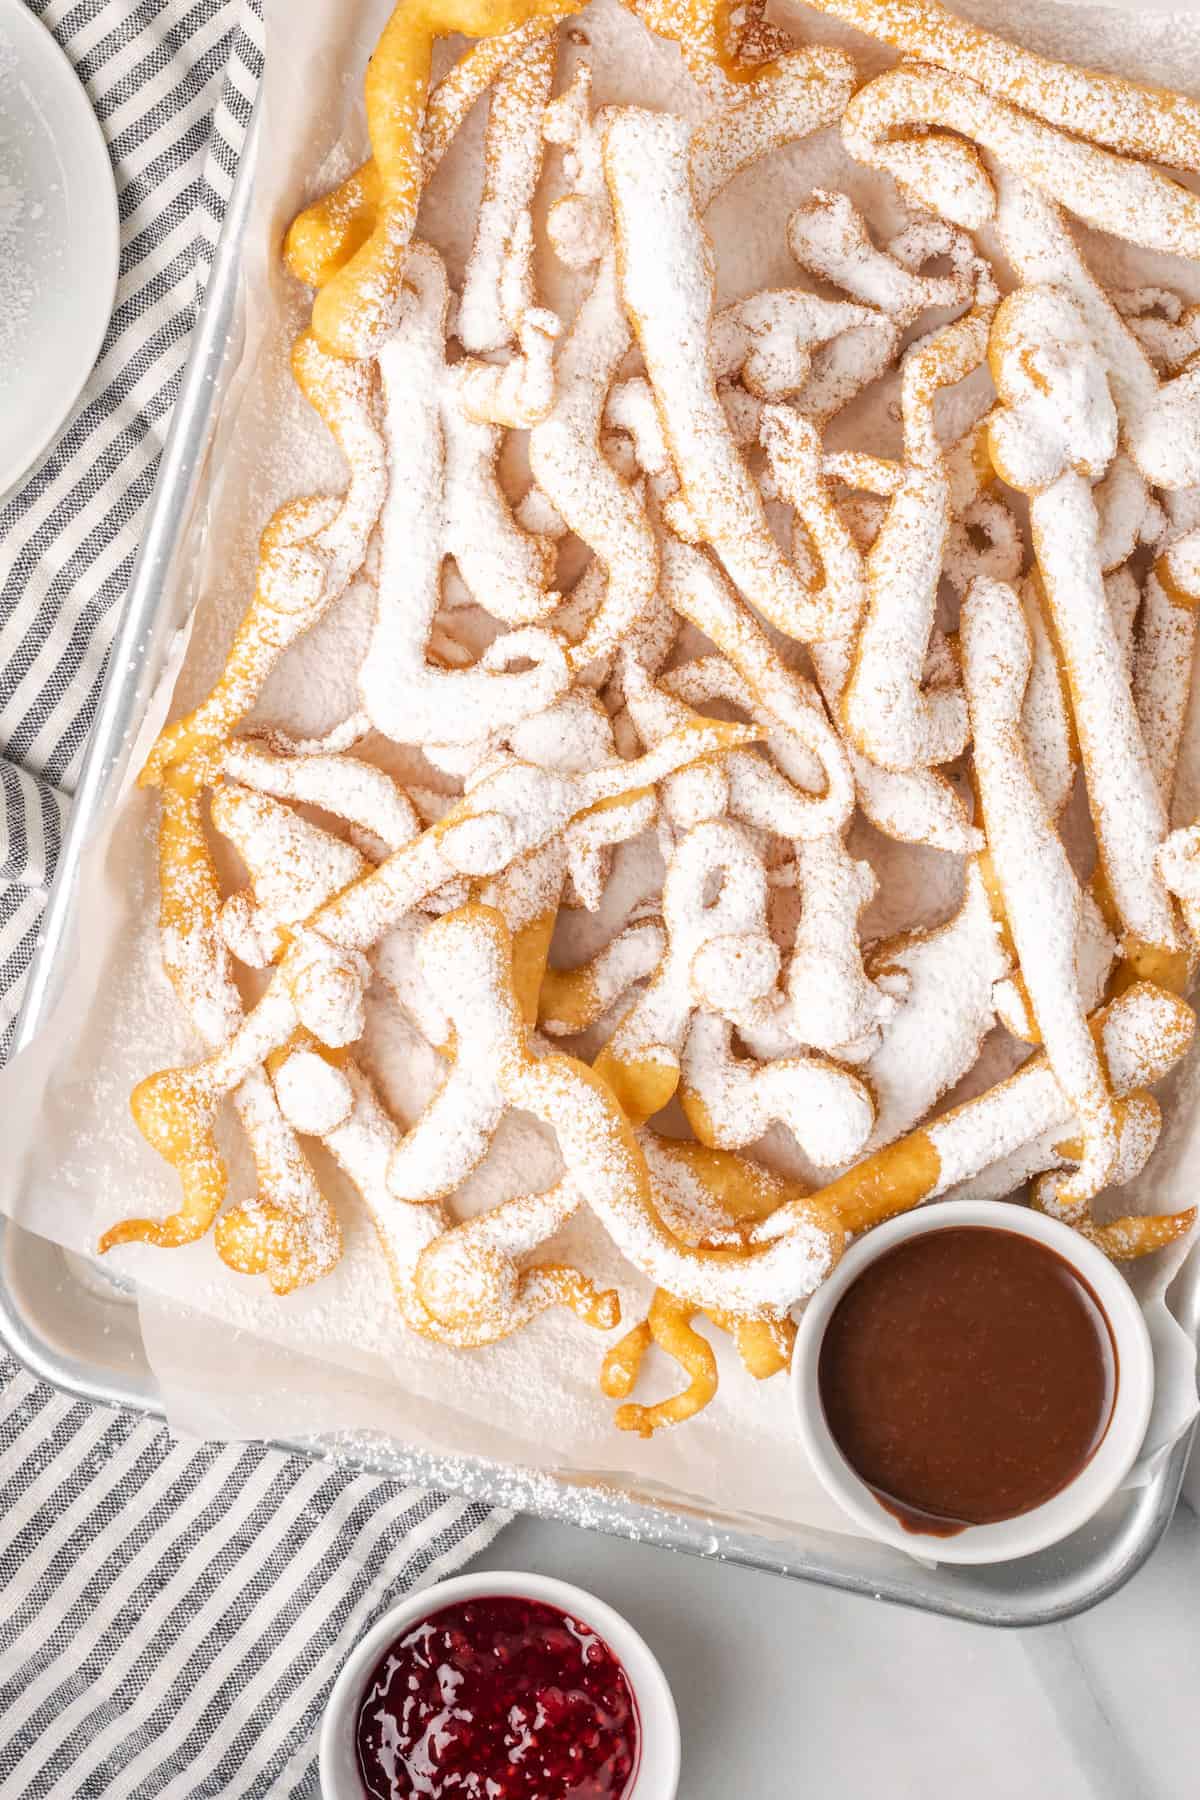 Homemade Funnel Cake {Crispy & Delicious!} - Spend With Pennies